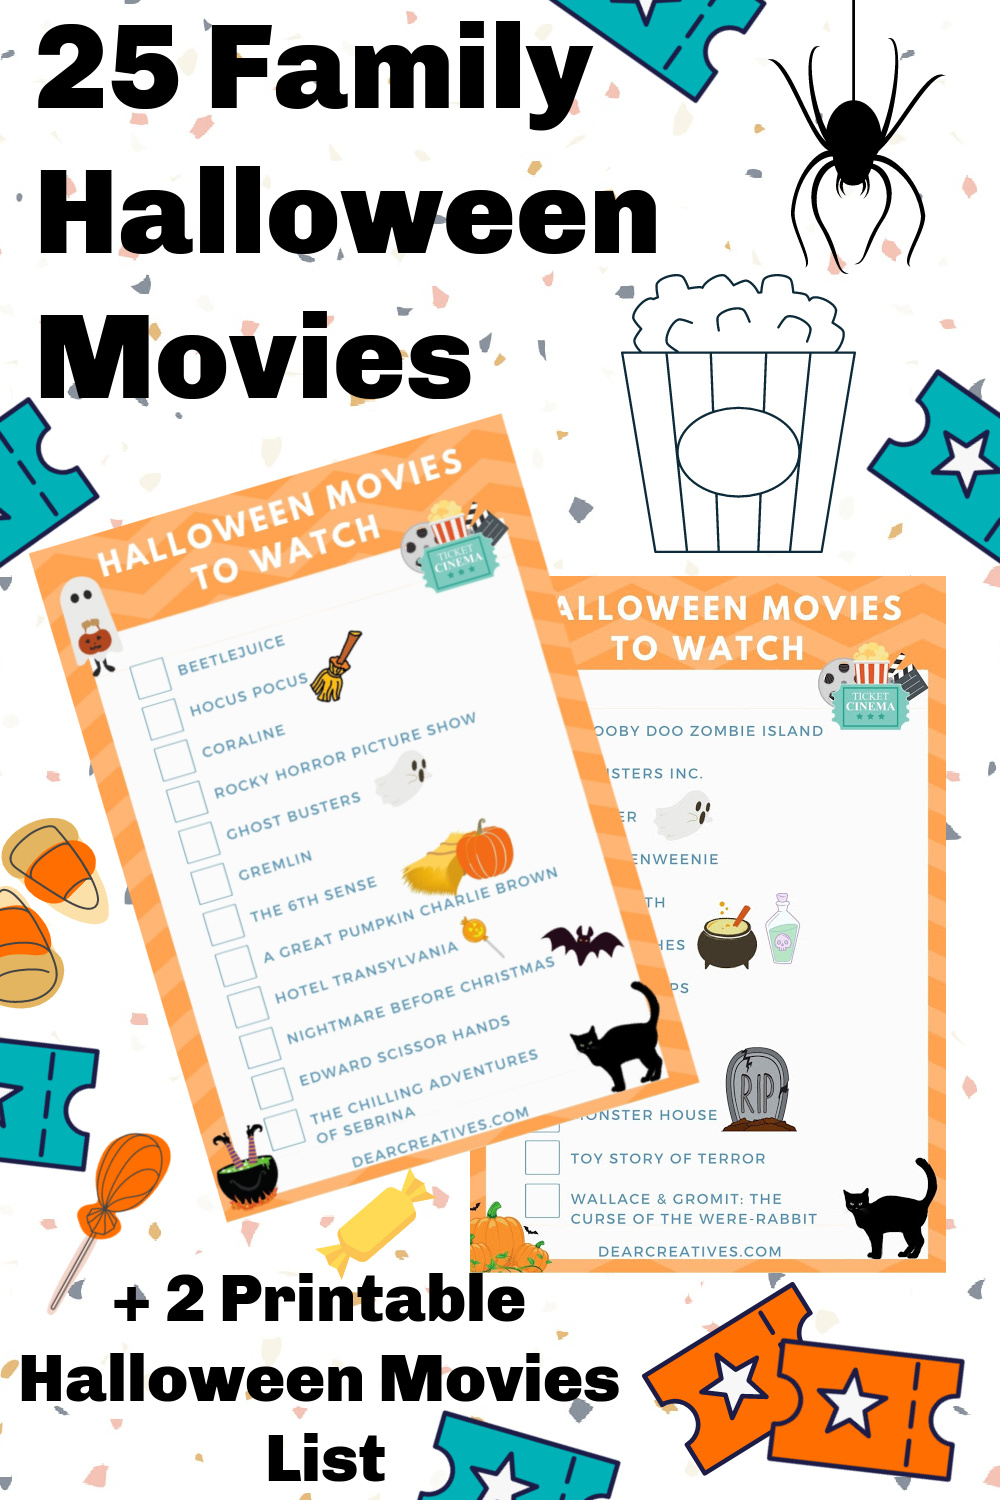 25 Family Halloween Movies To Watch!